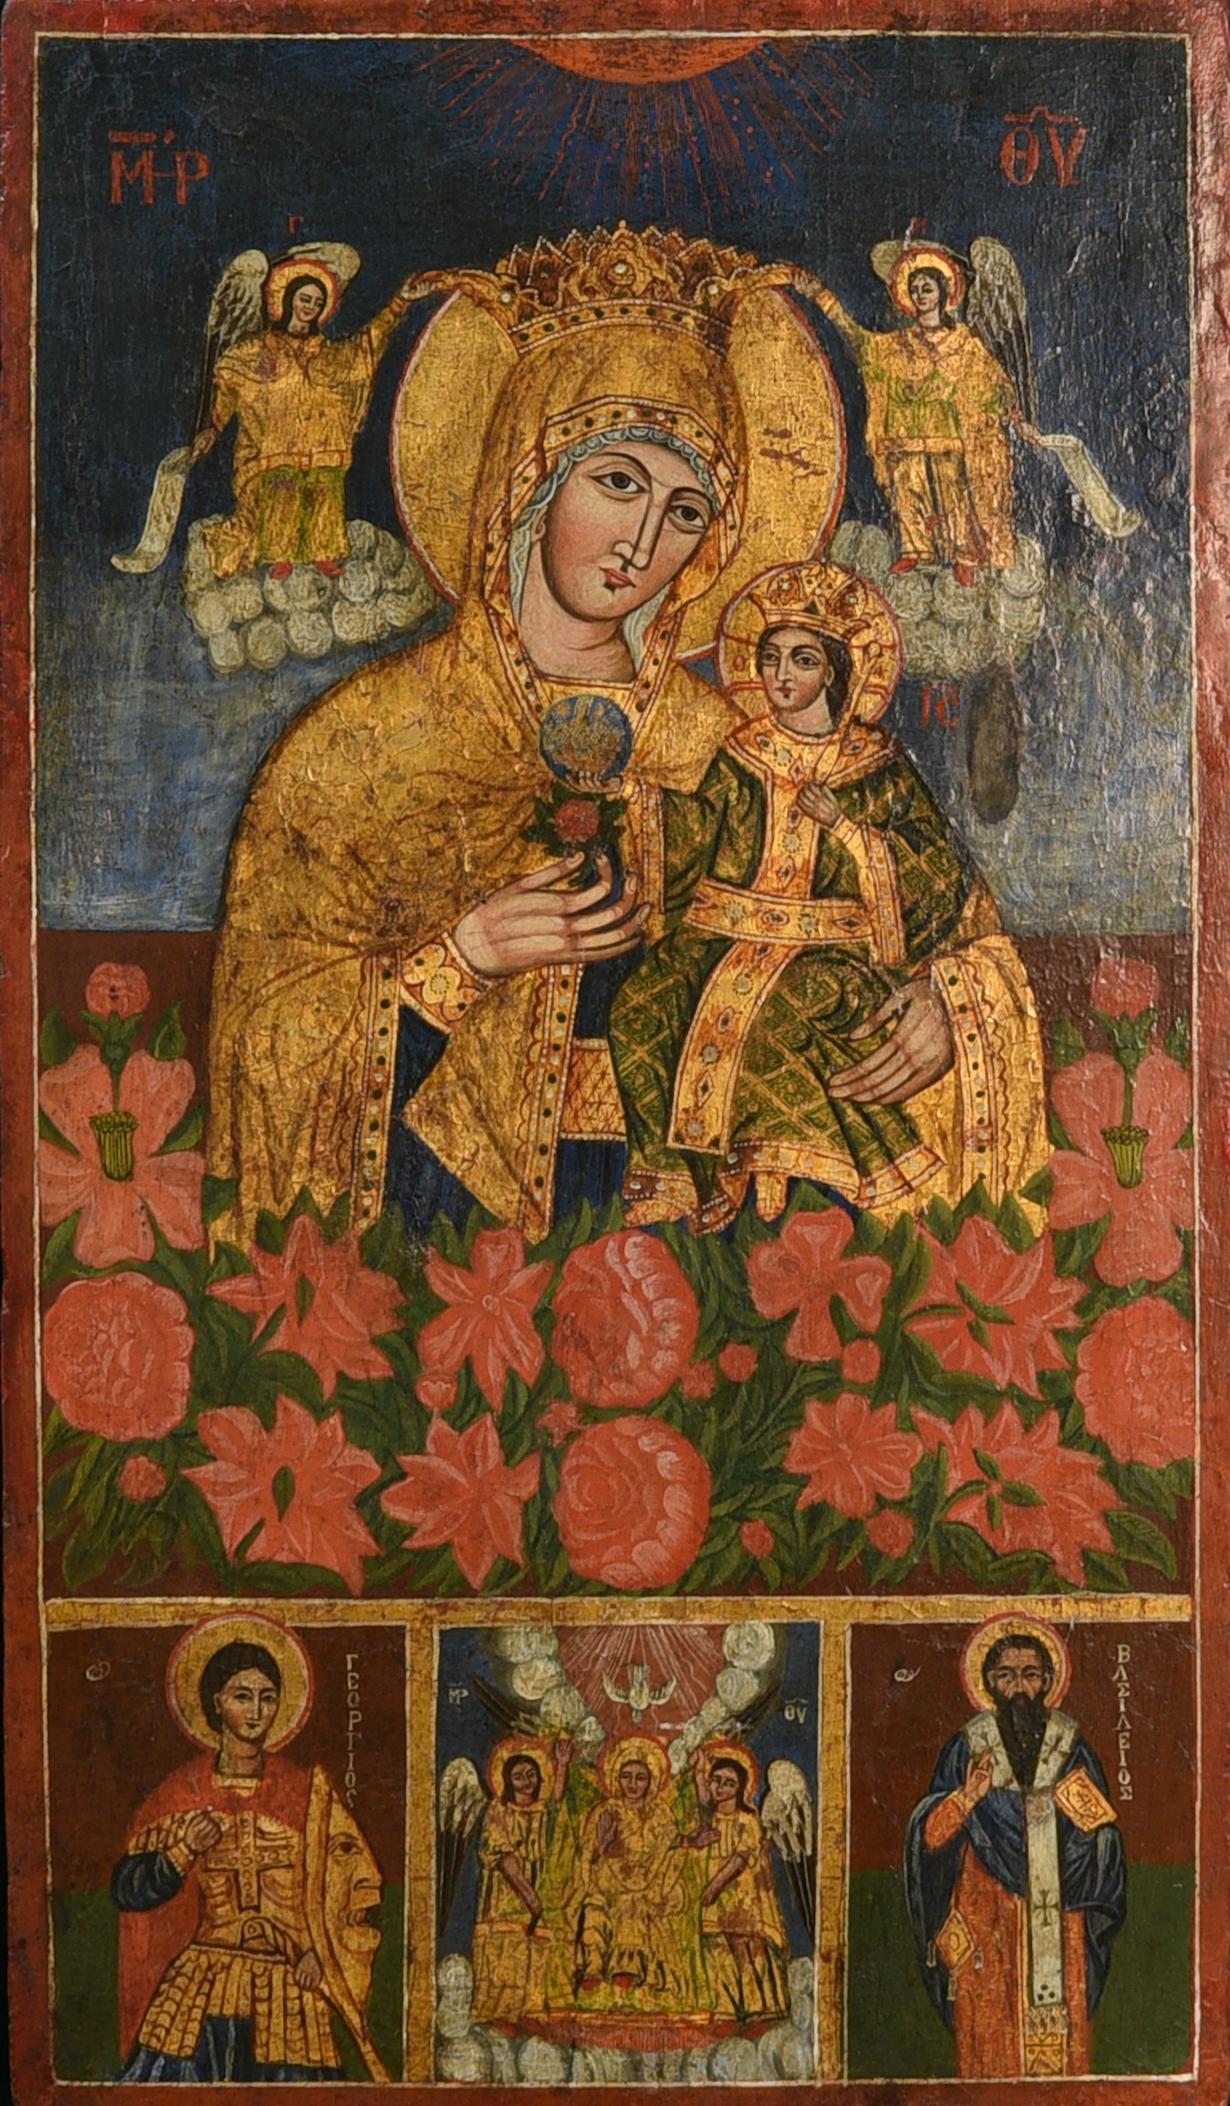 Greek orthodox icon (painted around the year 1800). 

At the top: 